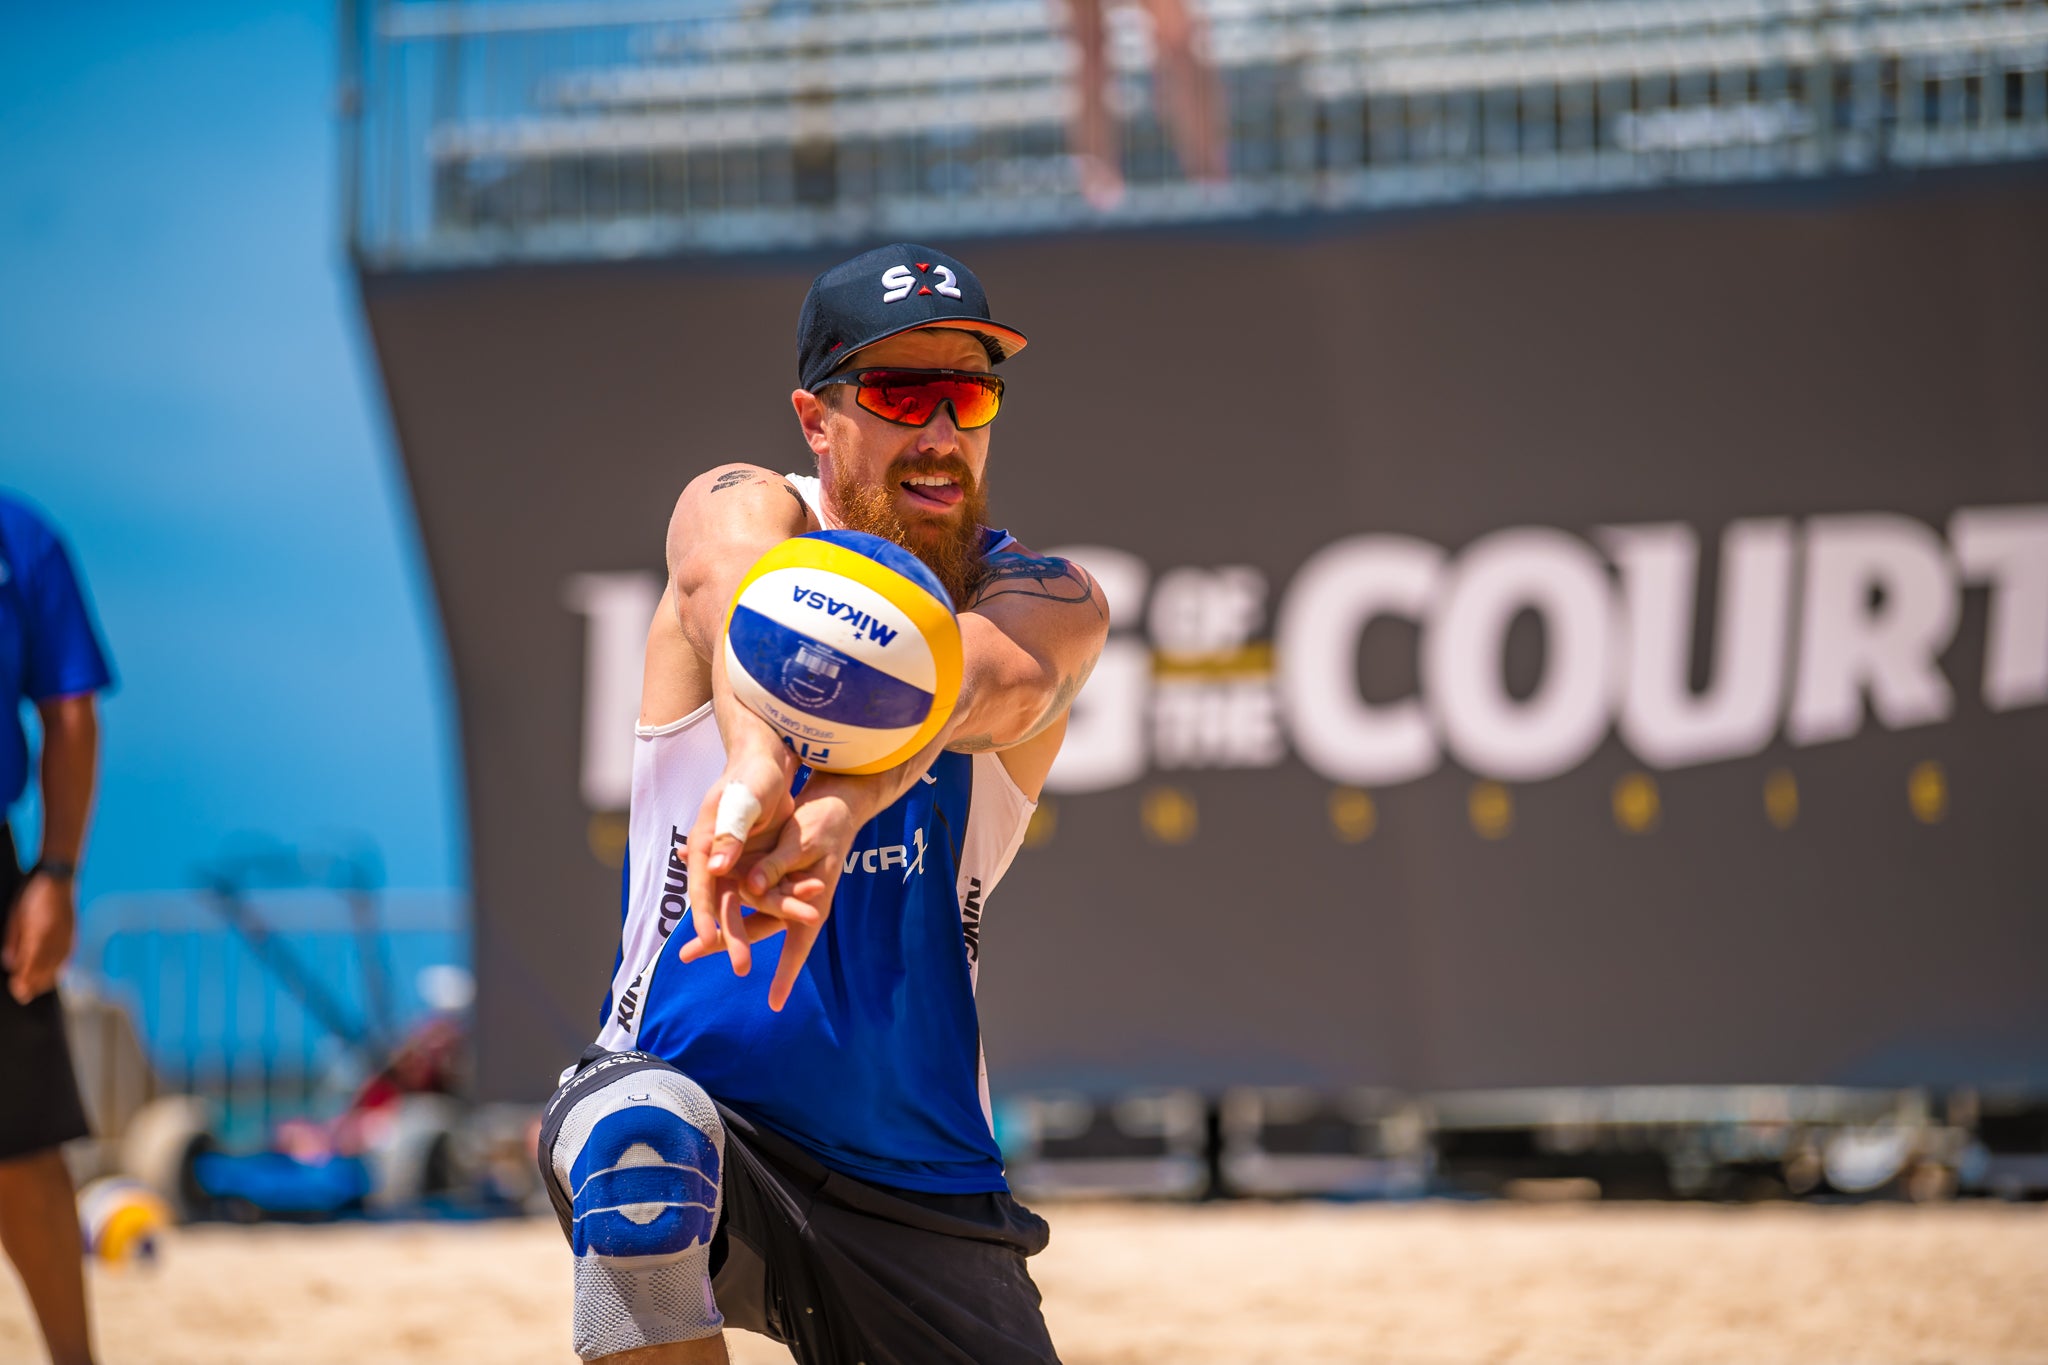 Canadian men could be team to beat in Commonwealth Games beach volleyball